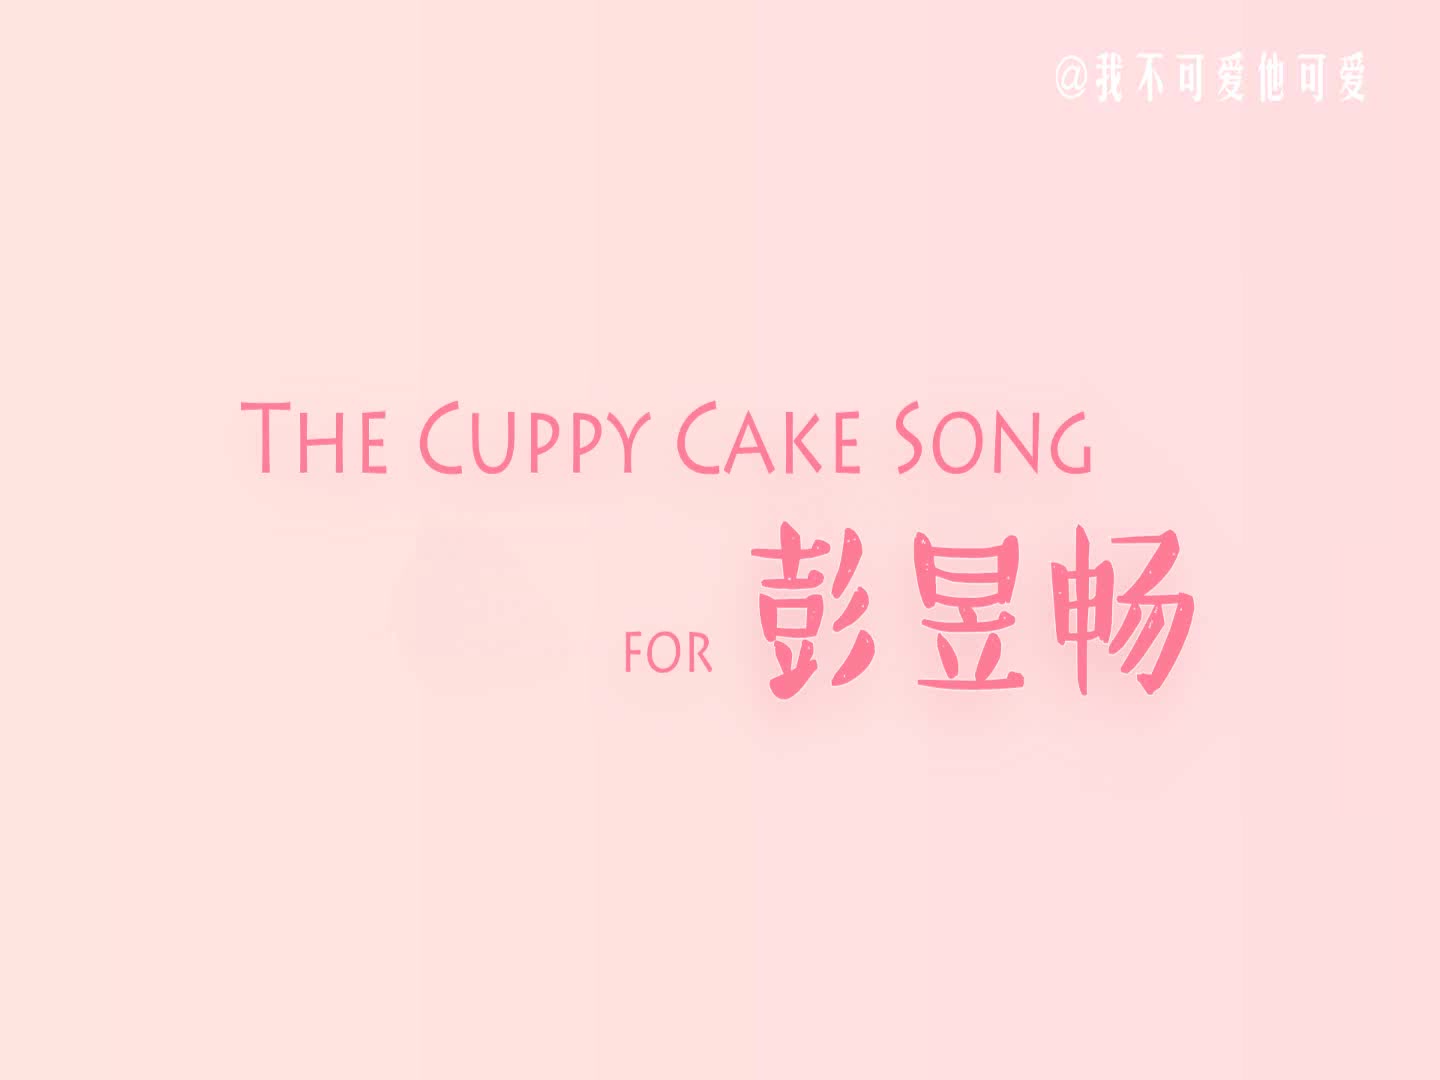 Cuppy Cake Song Chelsea Adigue On Twitter Check This Video Out